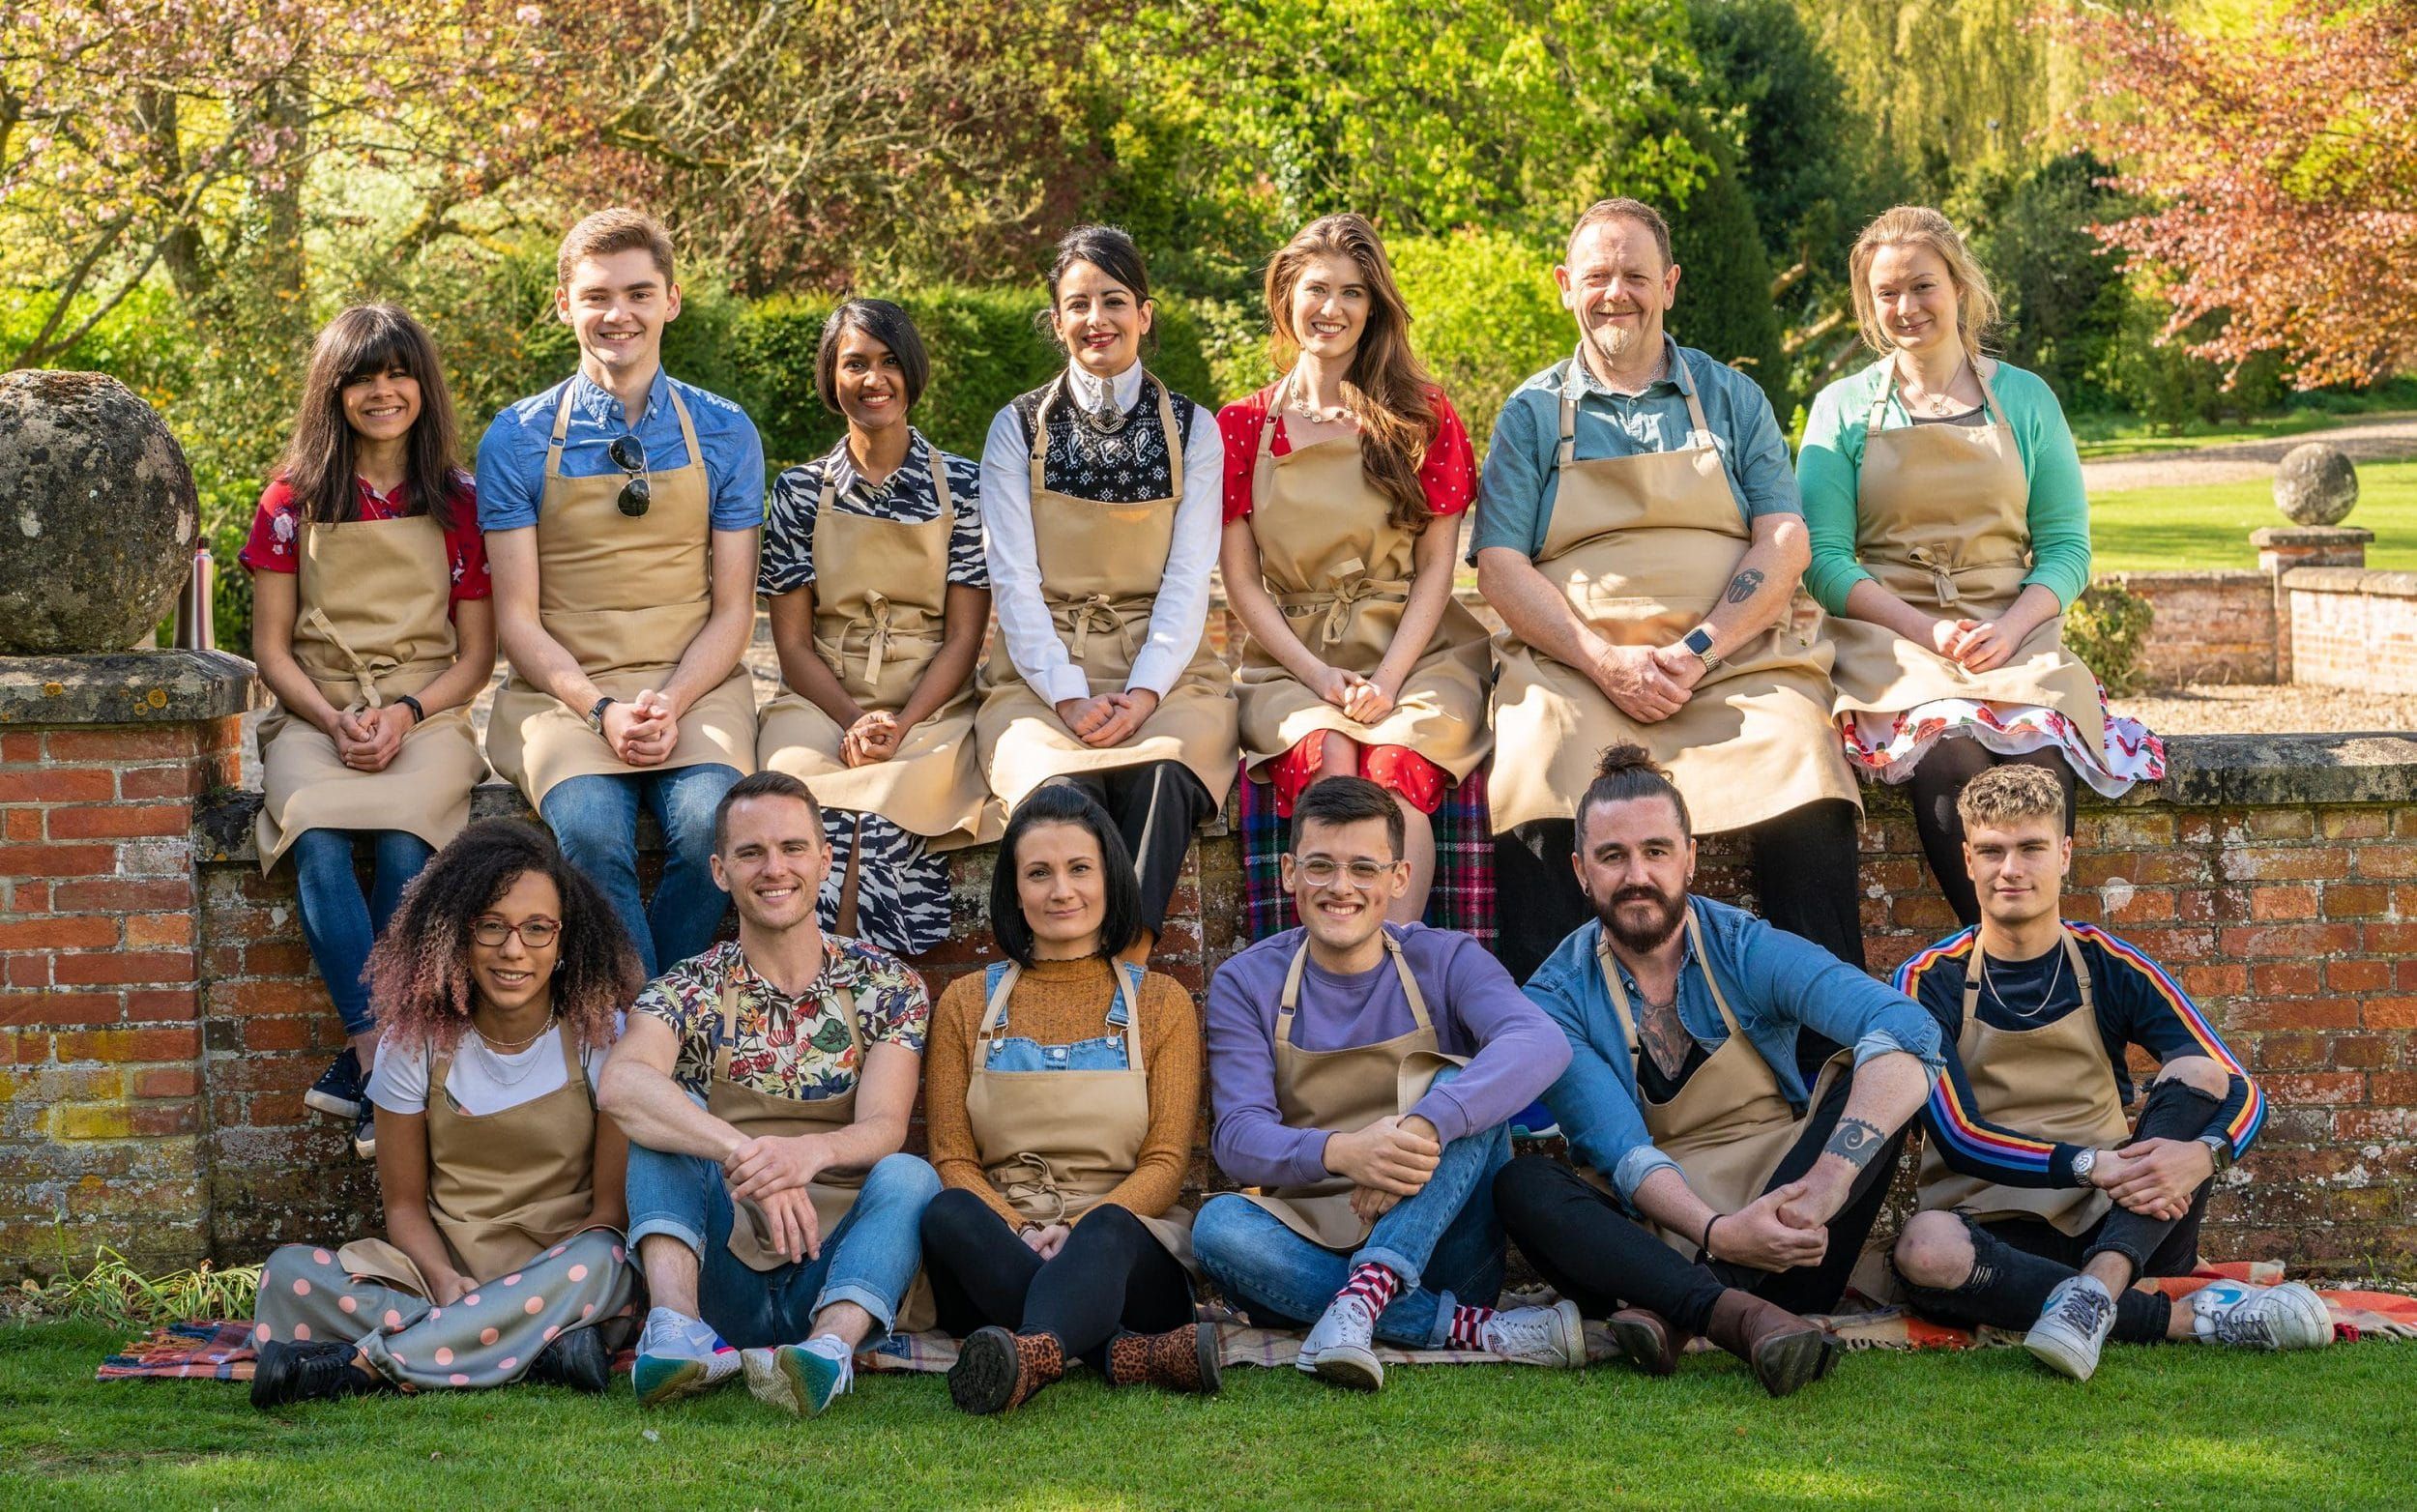 Good Crumb: On The Great British Bake Off